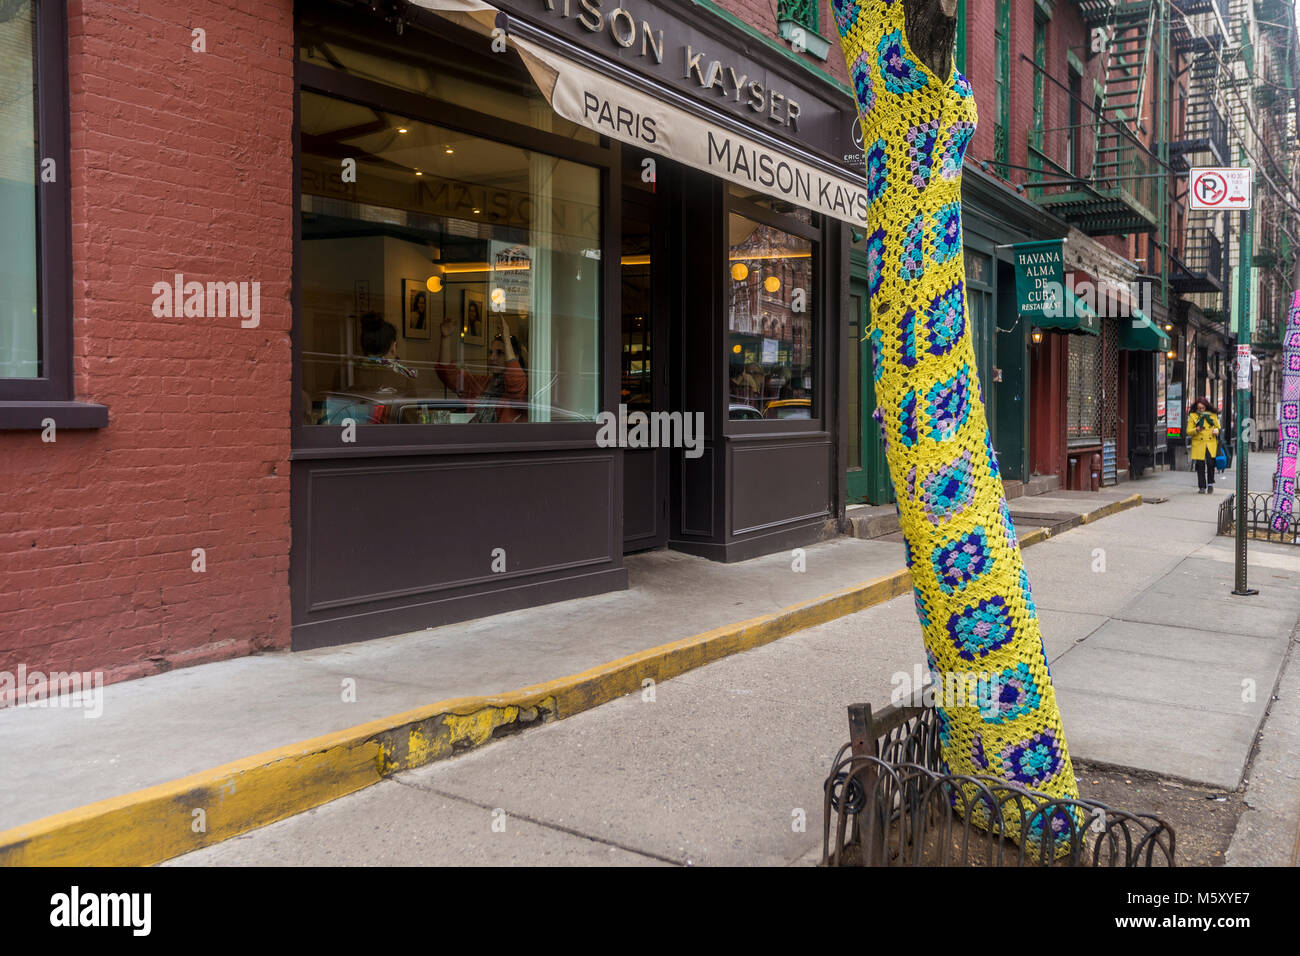 New York, NY, USA, 26 Feb 2018 - Beginning in November, shop keeper Holly Boardman, owner of local lingerie store Musèe Lingerie, began swaddling the trees in yarn. All in all, she used 1500 of yarn to cover the trees on Christopher Street in the West Village. The Parks Department has since given her until March to remove the chocheted covers for fear they could damage the trees. ©Stacy Walsh Rosenstock/Alamy Stock Photo